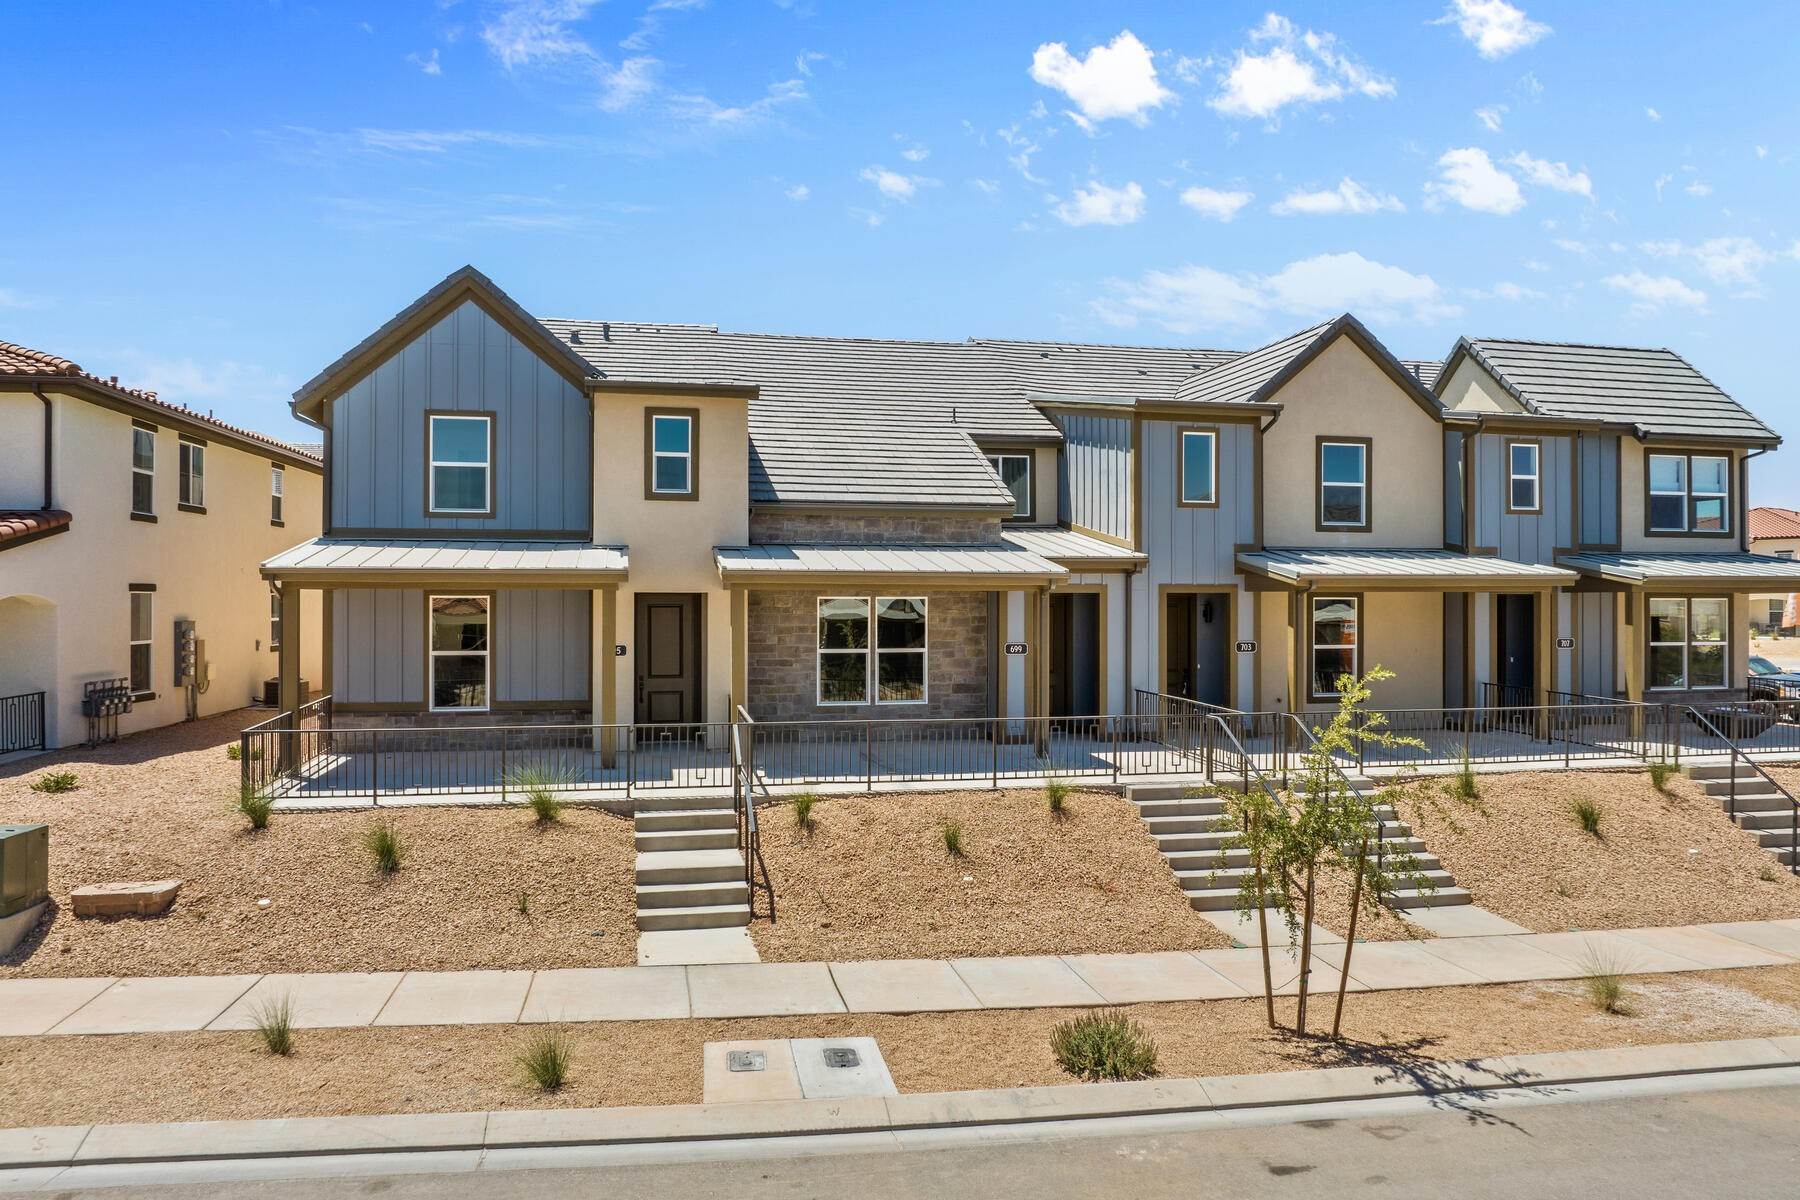 1. Townhouse for Sale at New Southwestern Contemporary Homes with Incredible Amenities in St. George 699 W Claystone Drive, Lot 21 Block 8 St. George, Utah 84790 United States